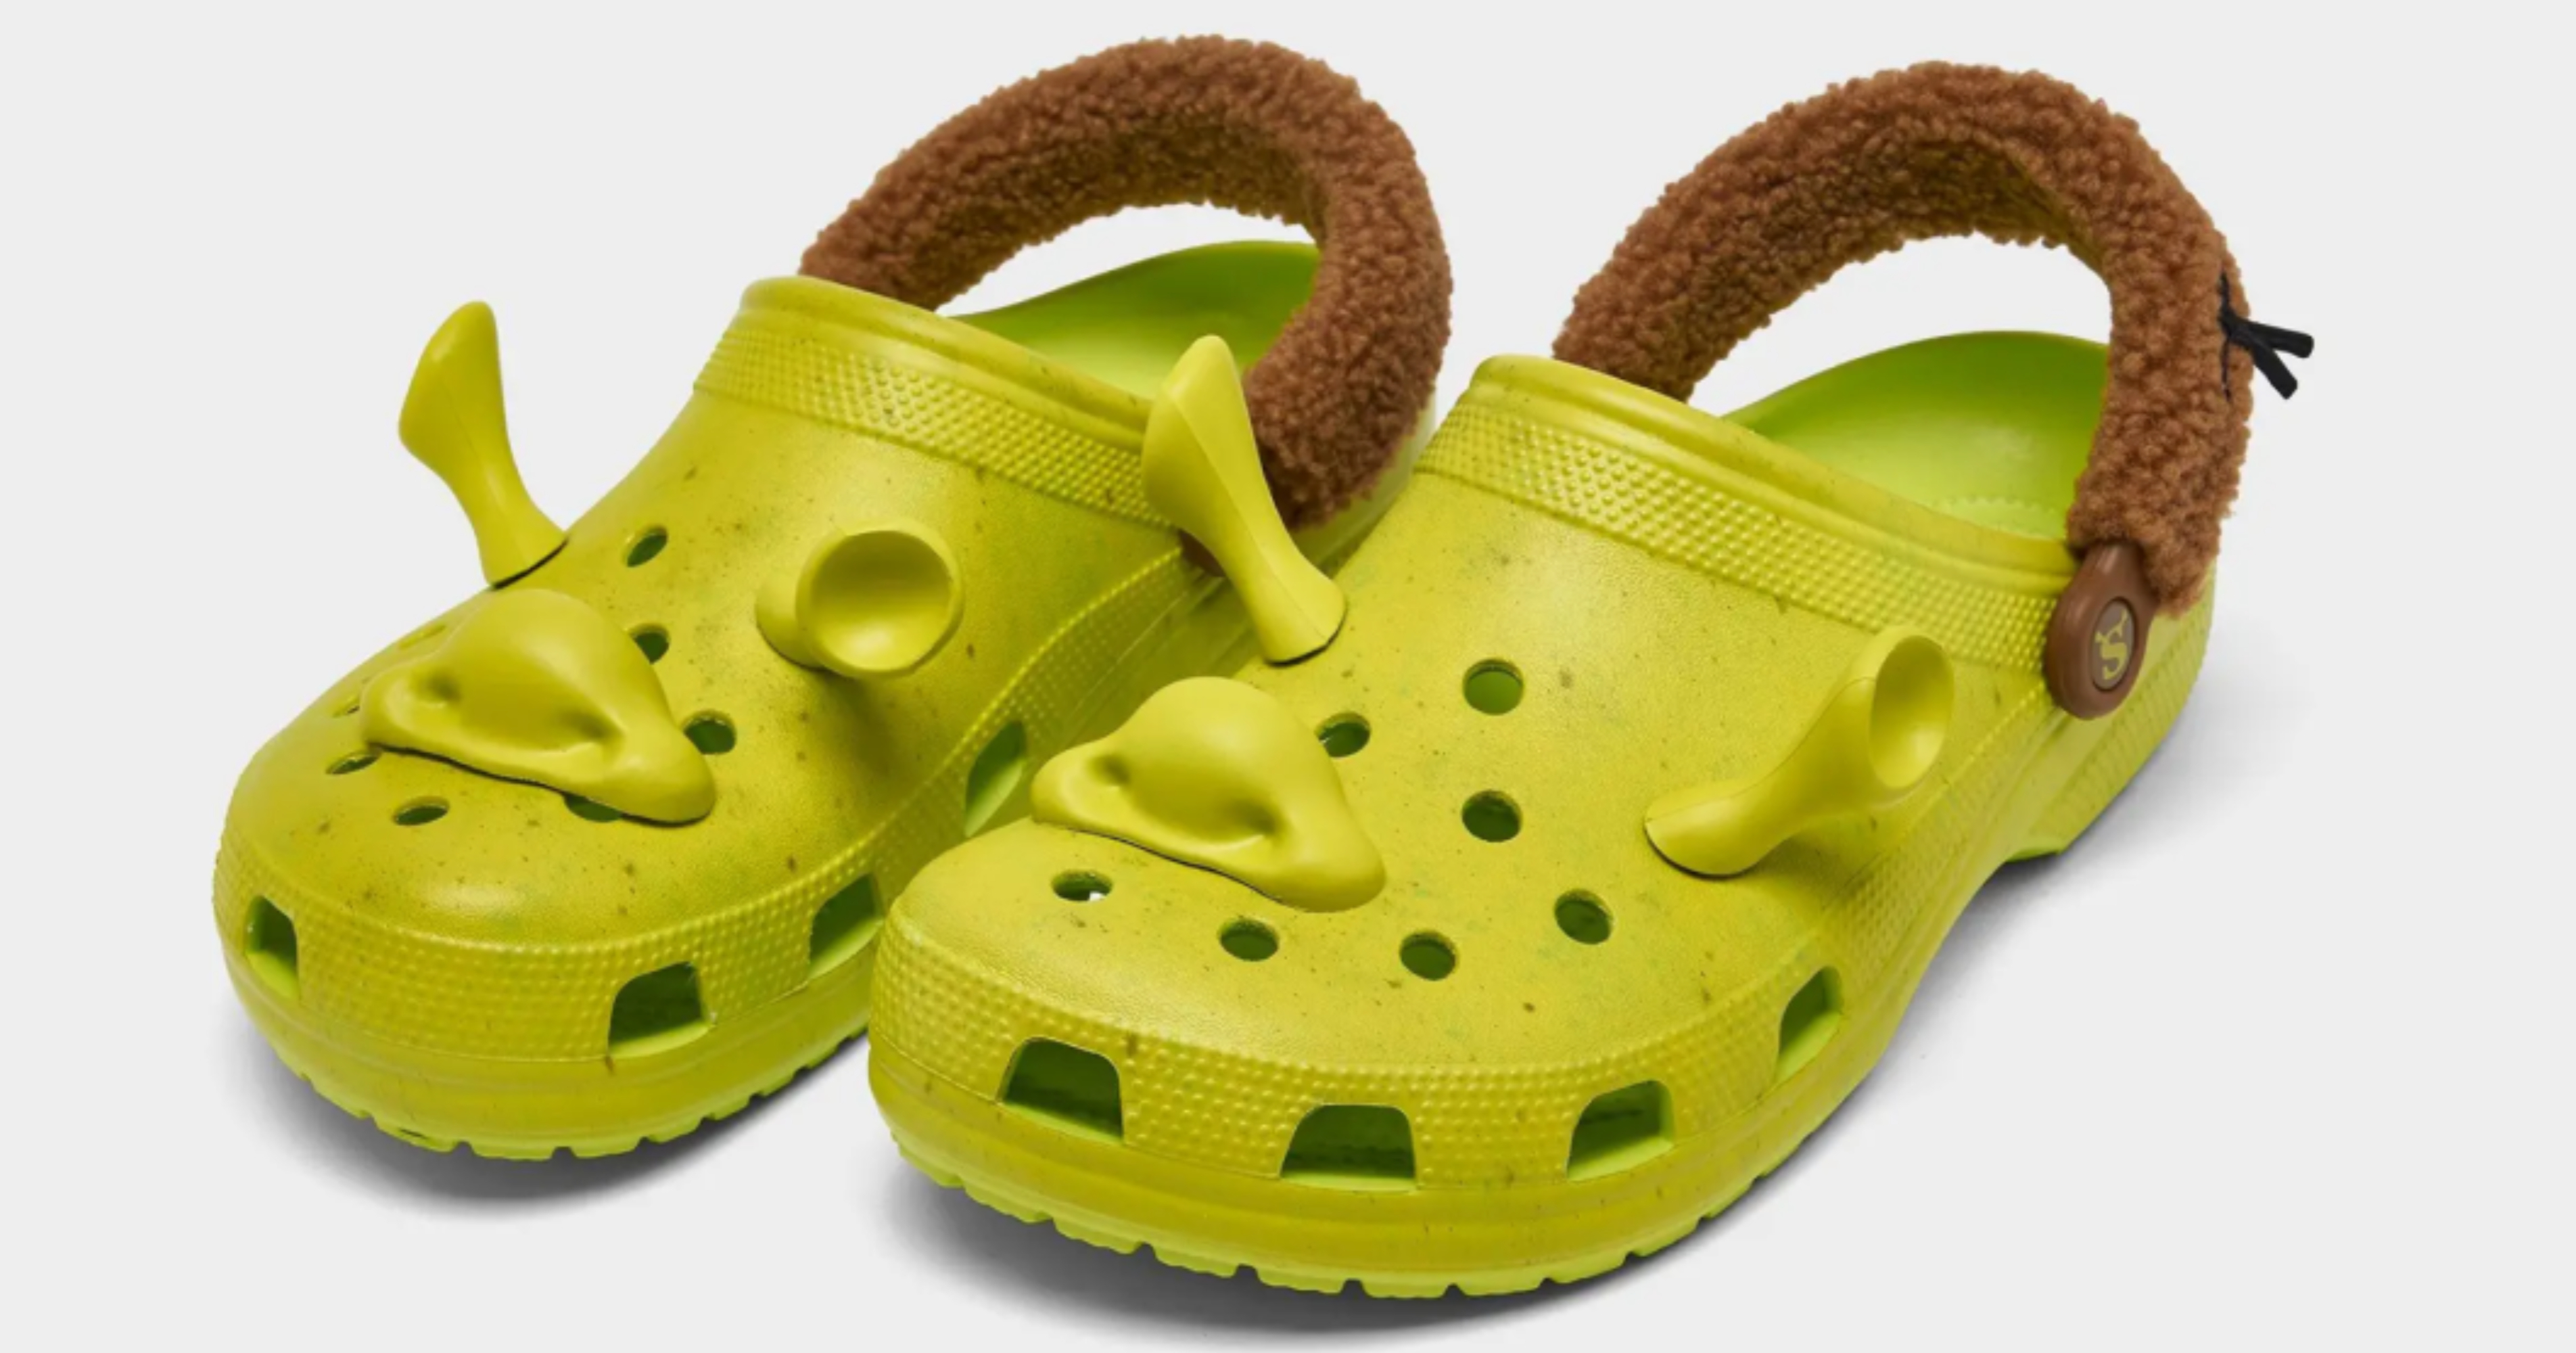 Here's an official look at the Shrek x crocs classic clog, coming soon.  Thoughts ? 🟢